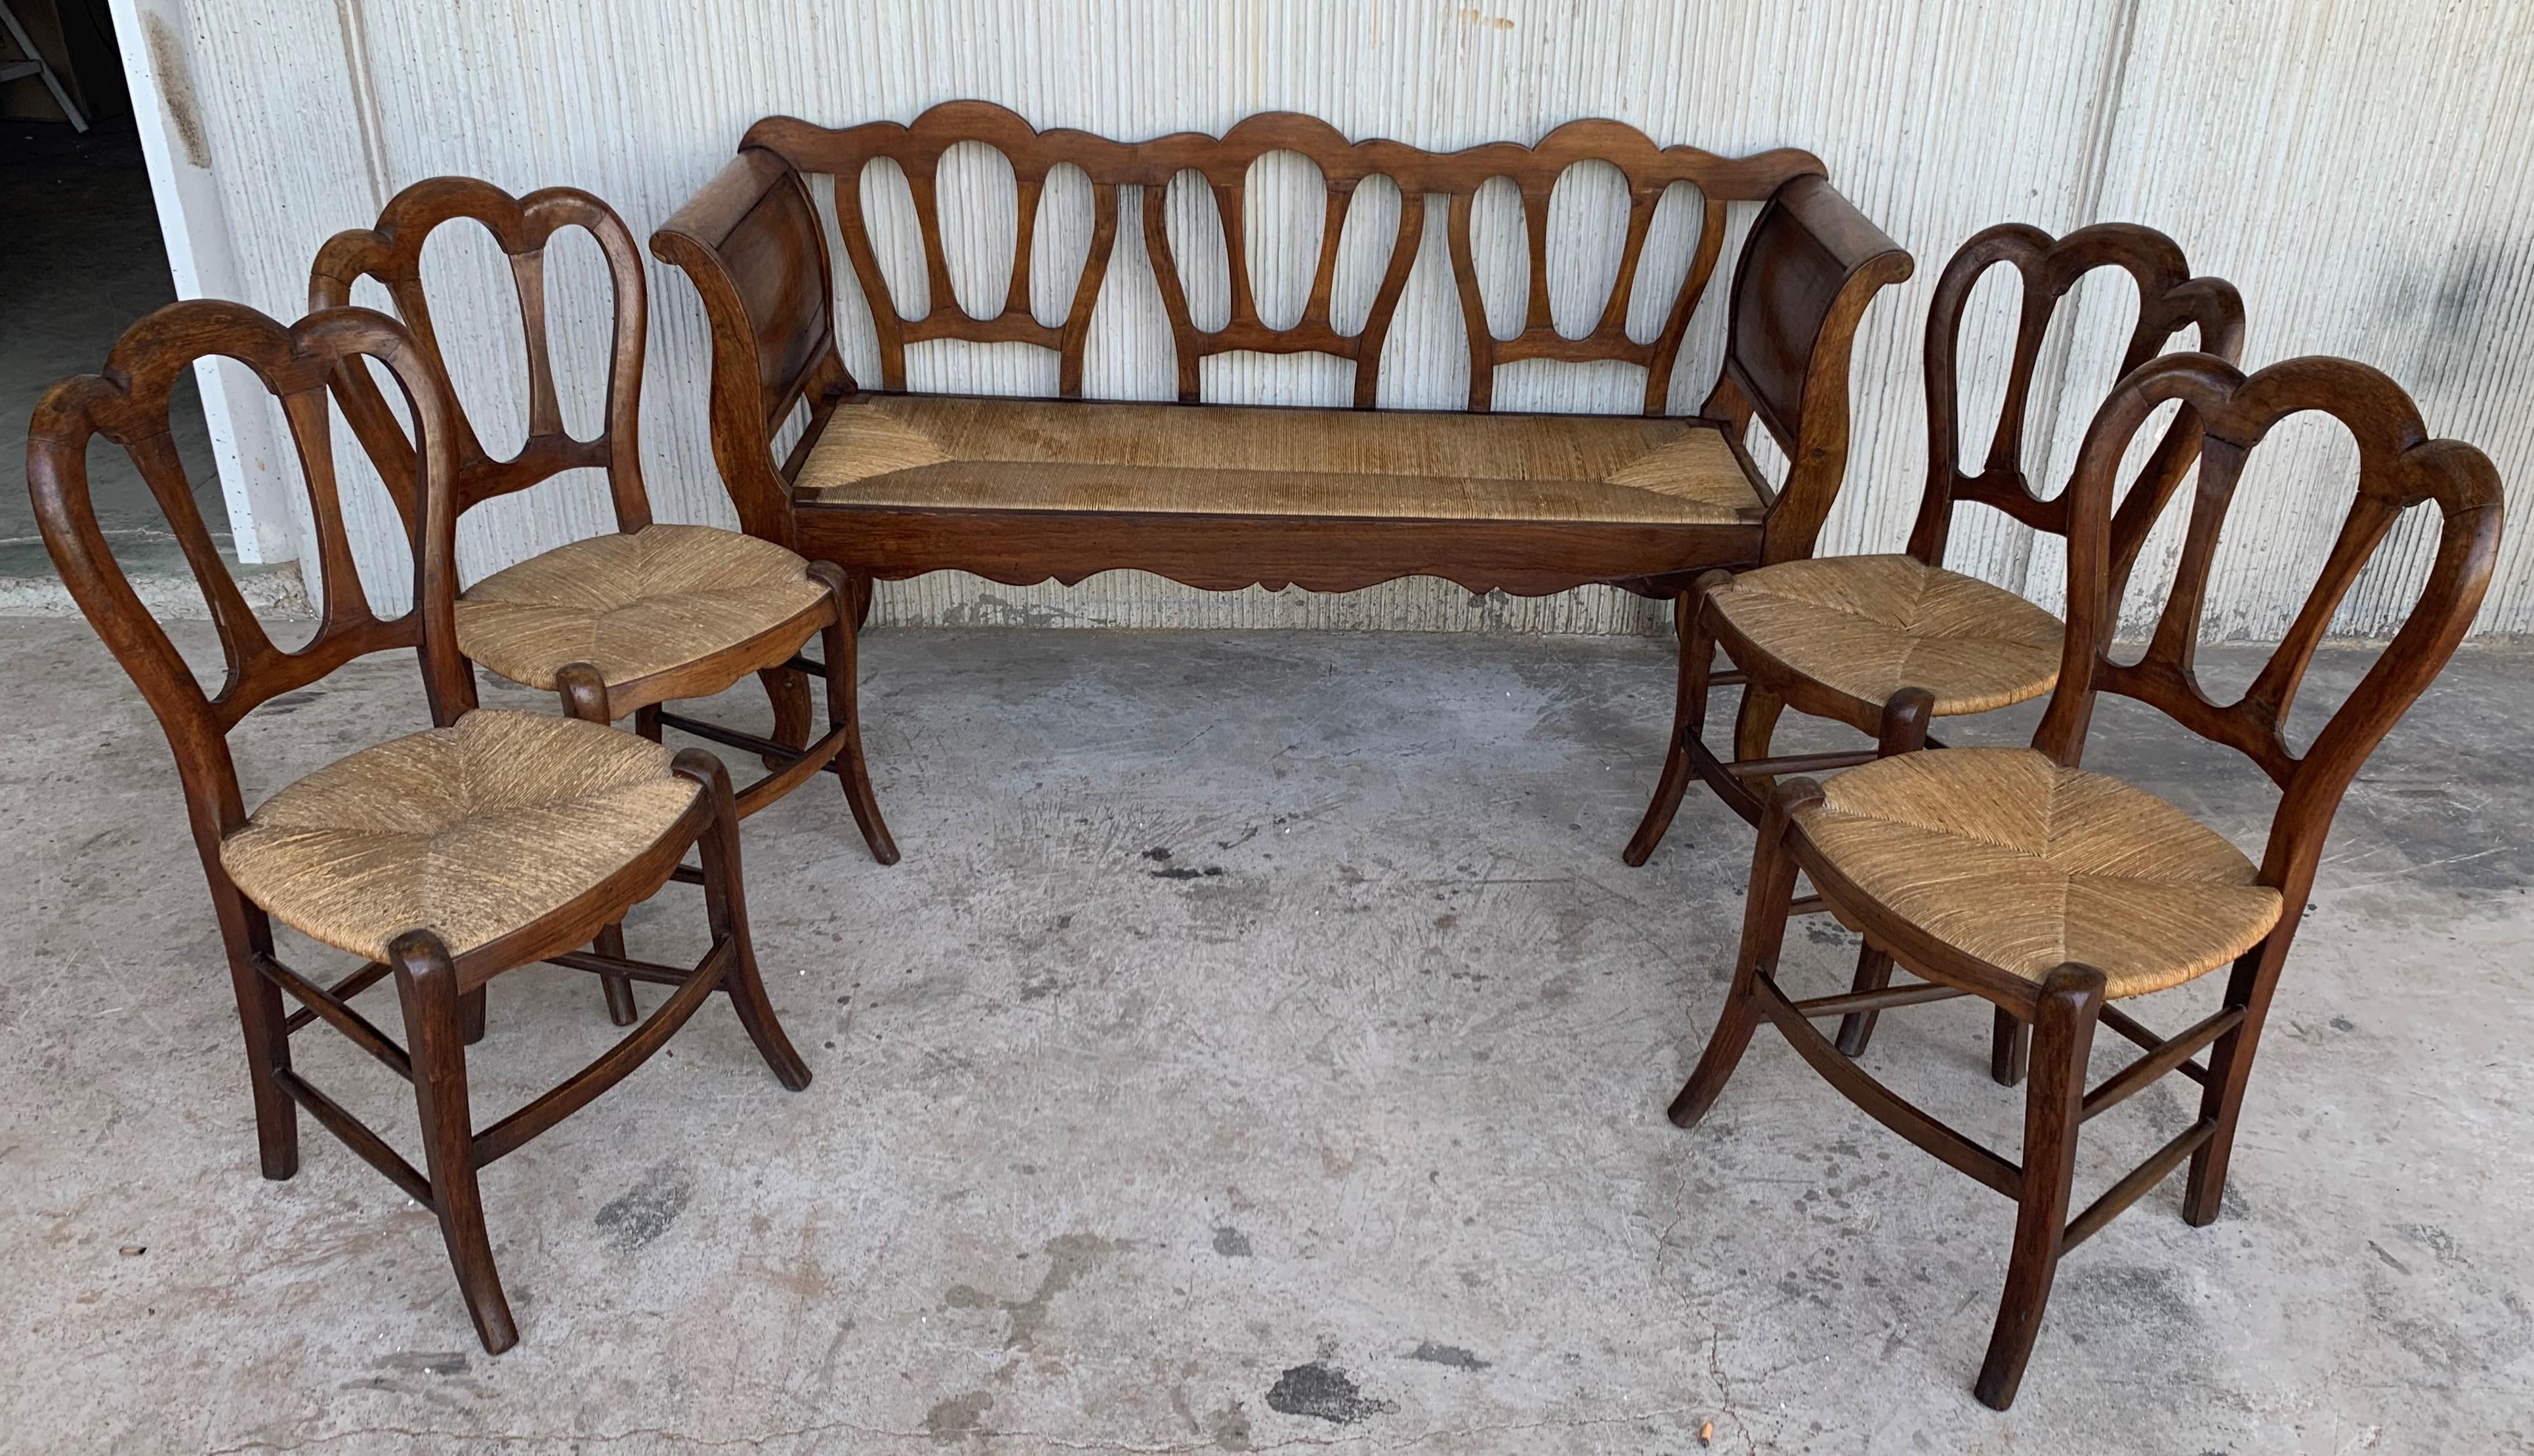 Antique 19th century English Victorian balloon back mahogany library side chairs. 
Listing features turn carved legs, caned seats, balloon backs, solid wood construction, beautiful wood grain, very nice antique item, circa 19th century. 

Chair